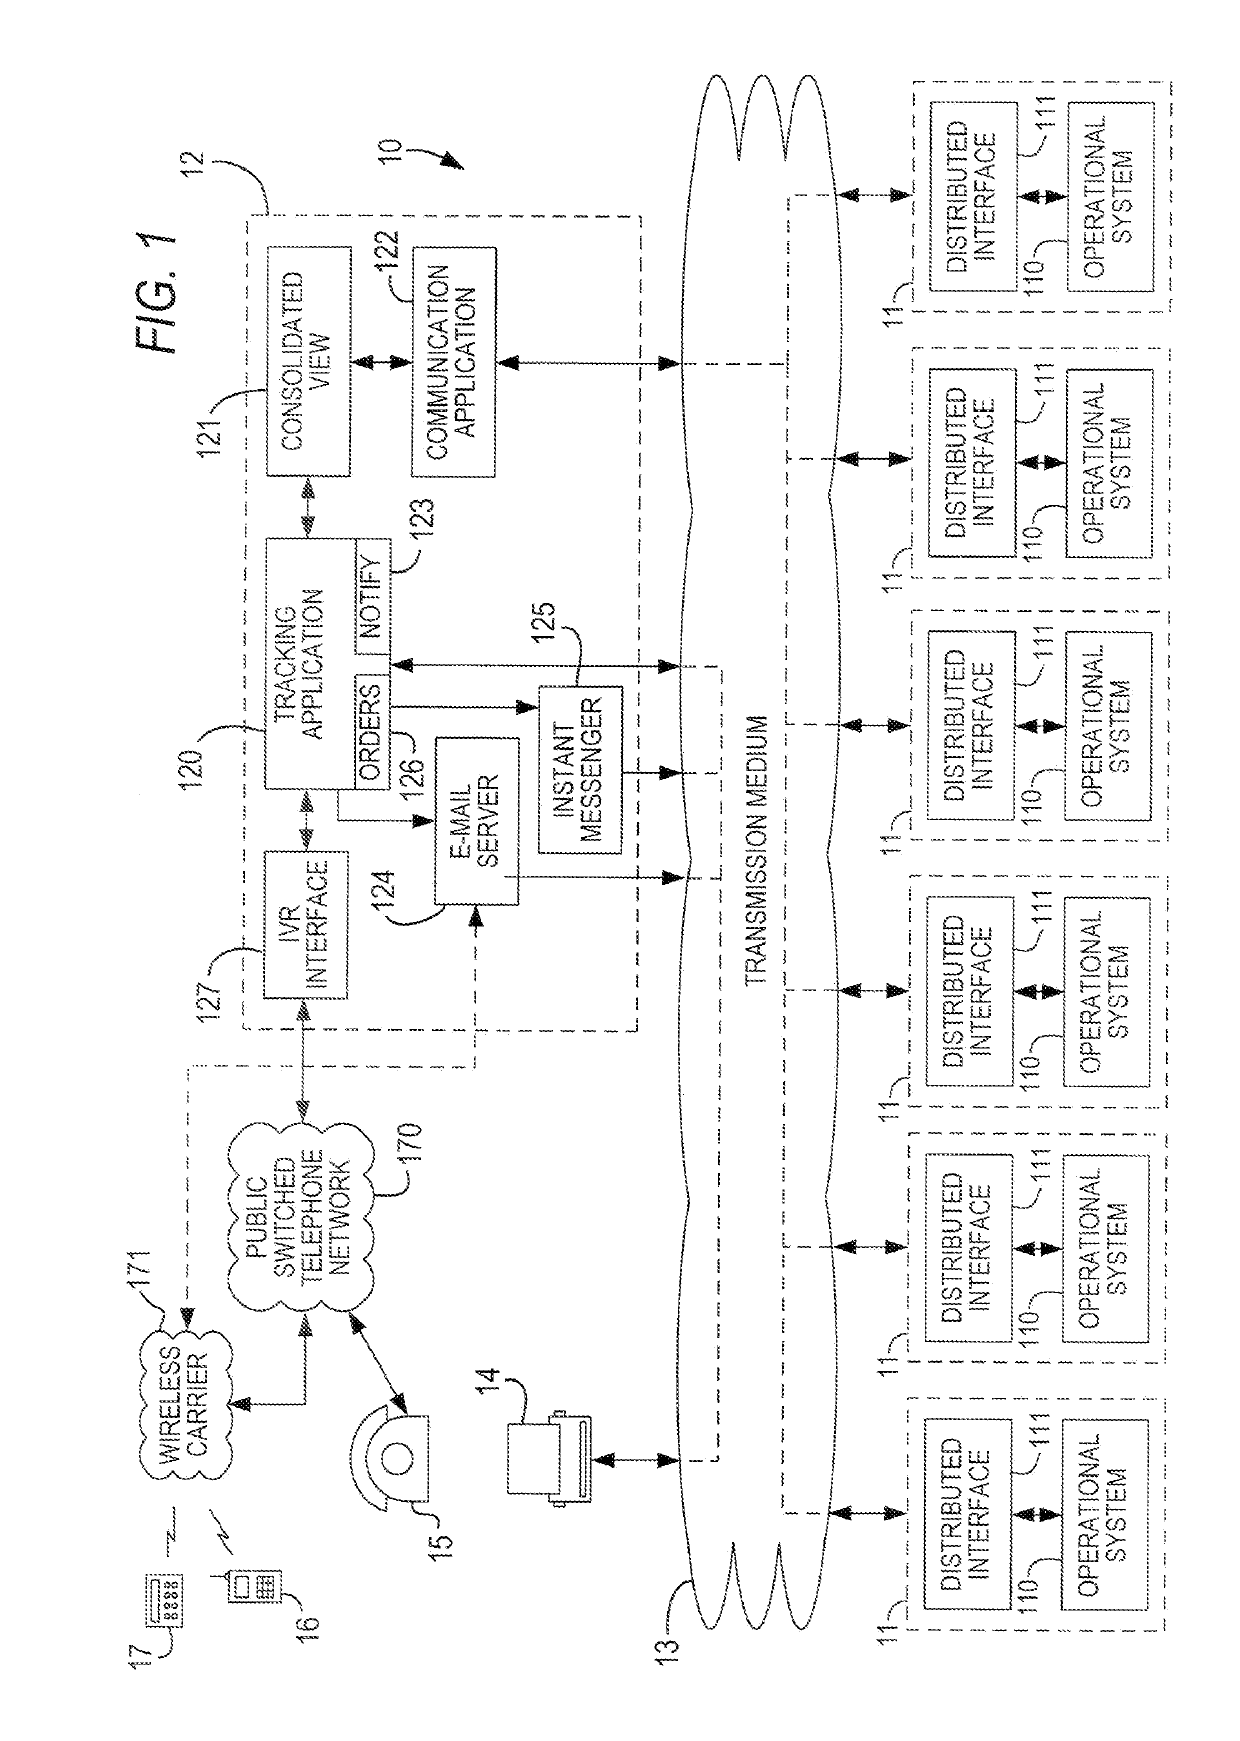 Method and system for centralized order status tracking in a decentralized ordering system